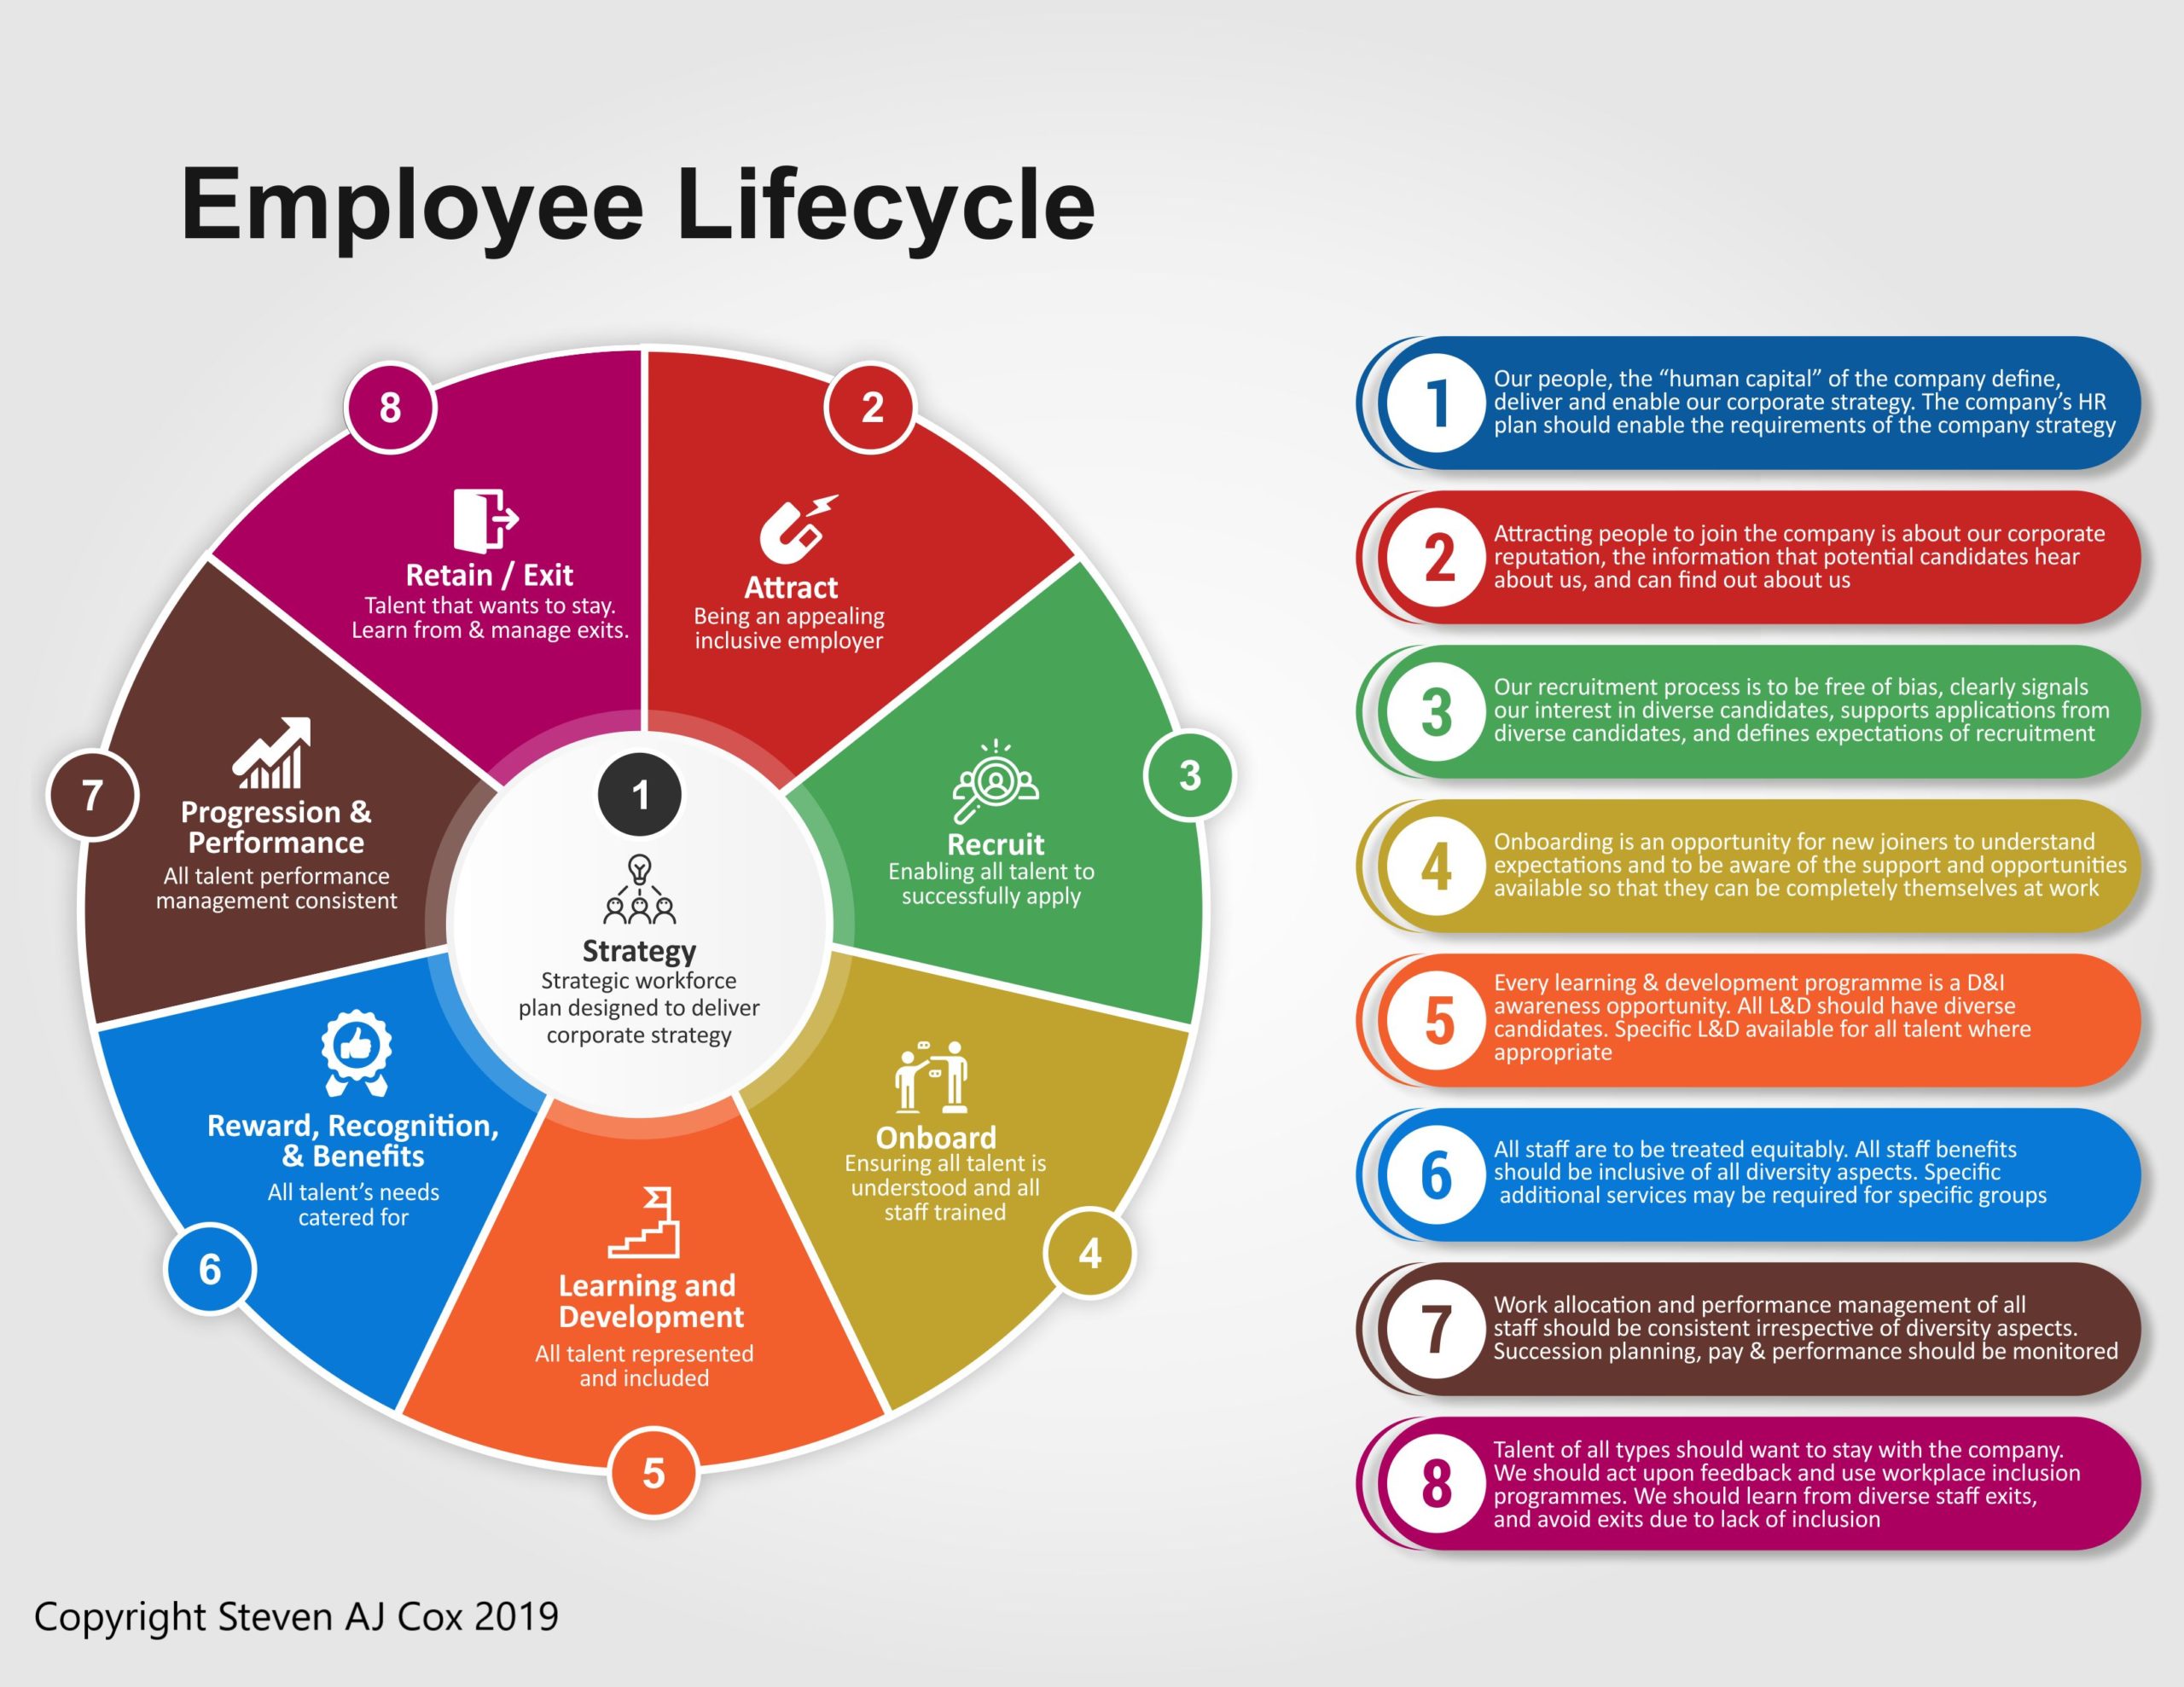 Diversity and inclusion the employee life cycle